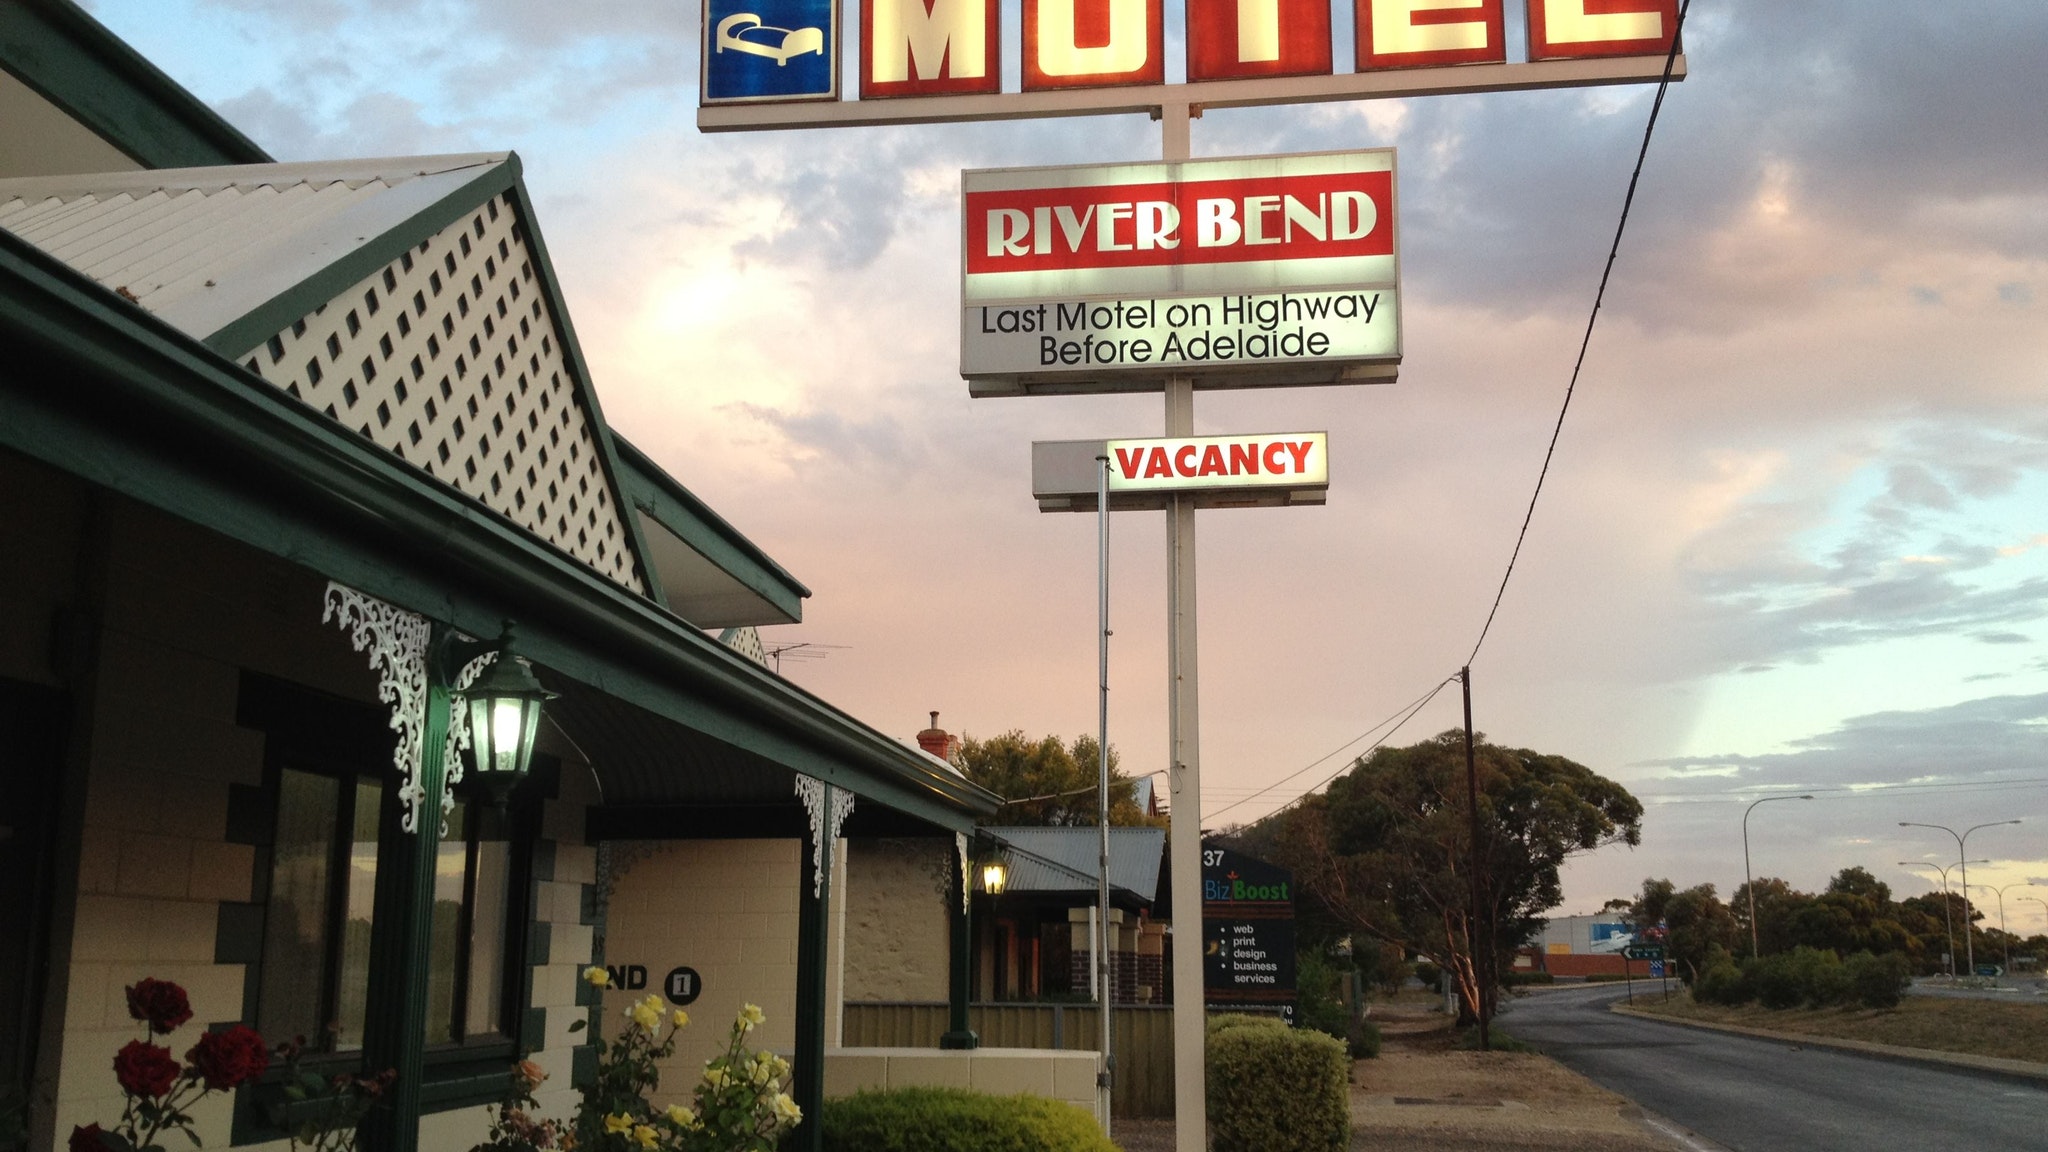 Motel Riverbend - Accommodation Adelaide